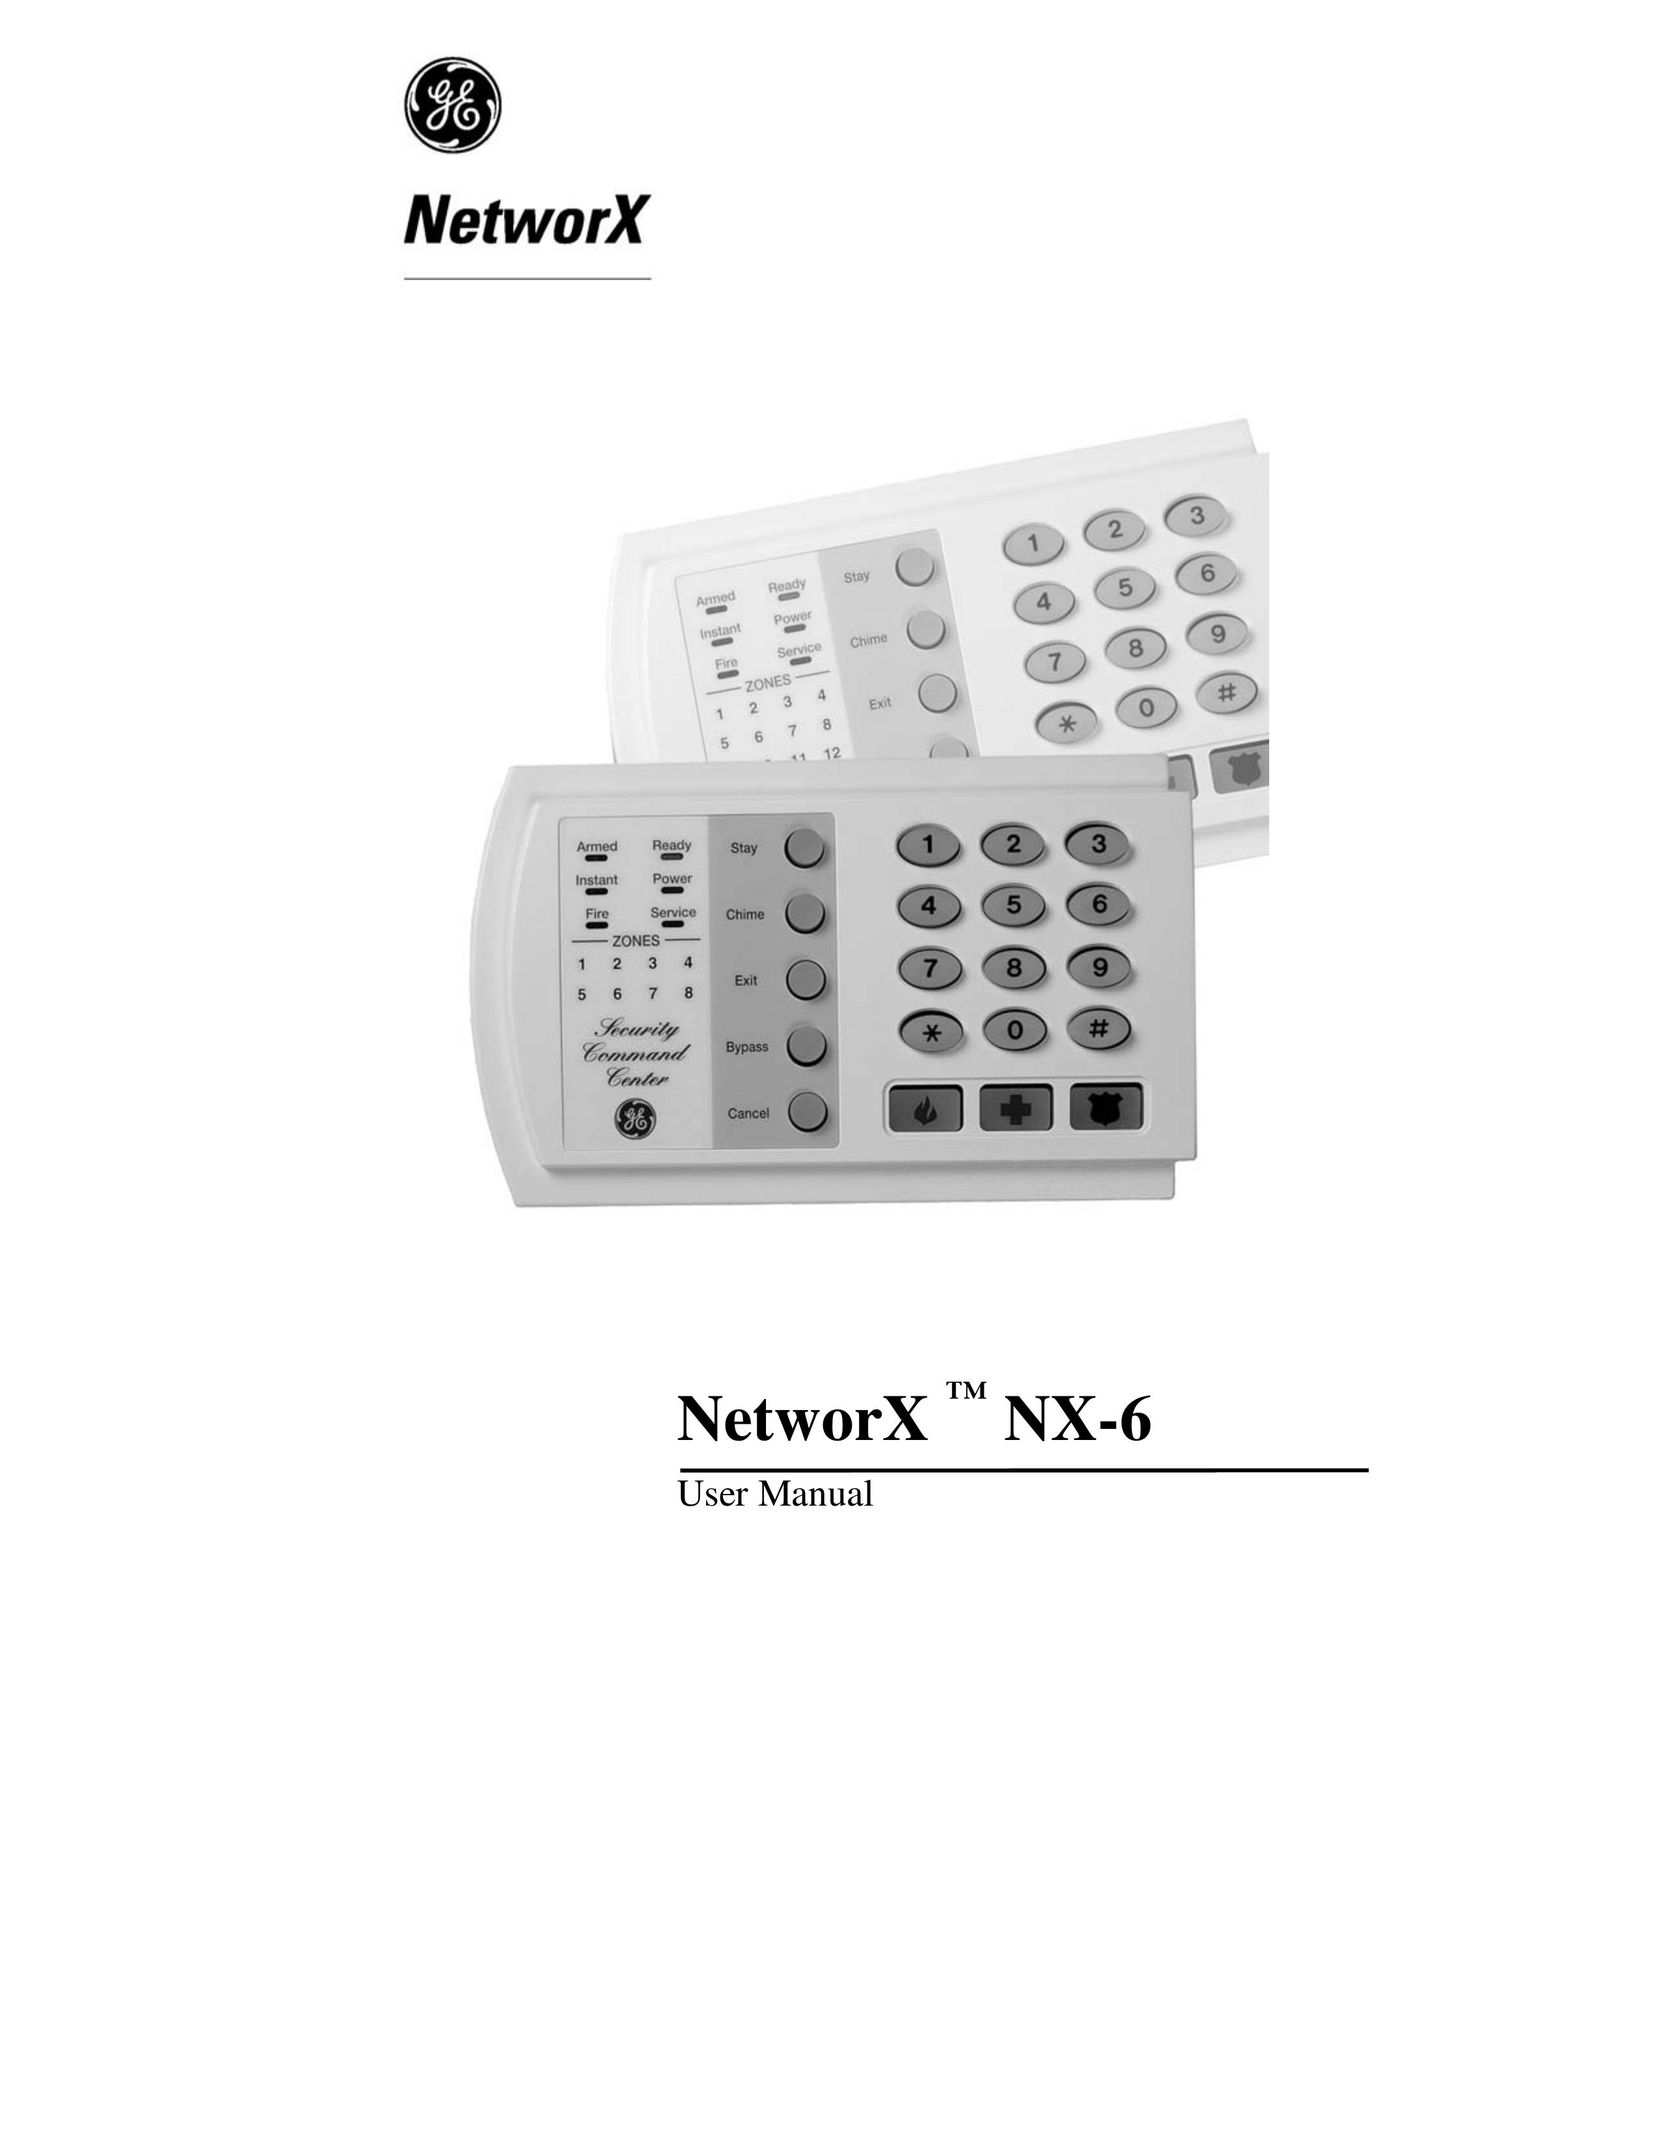 GE NX-124E Home Security System User Manual